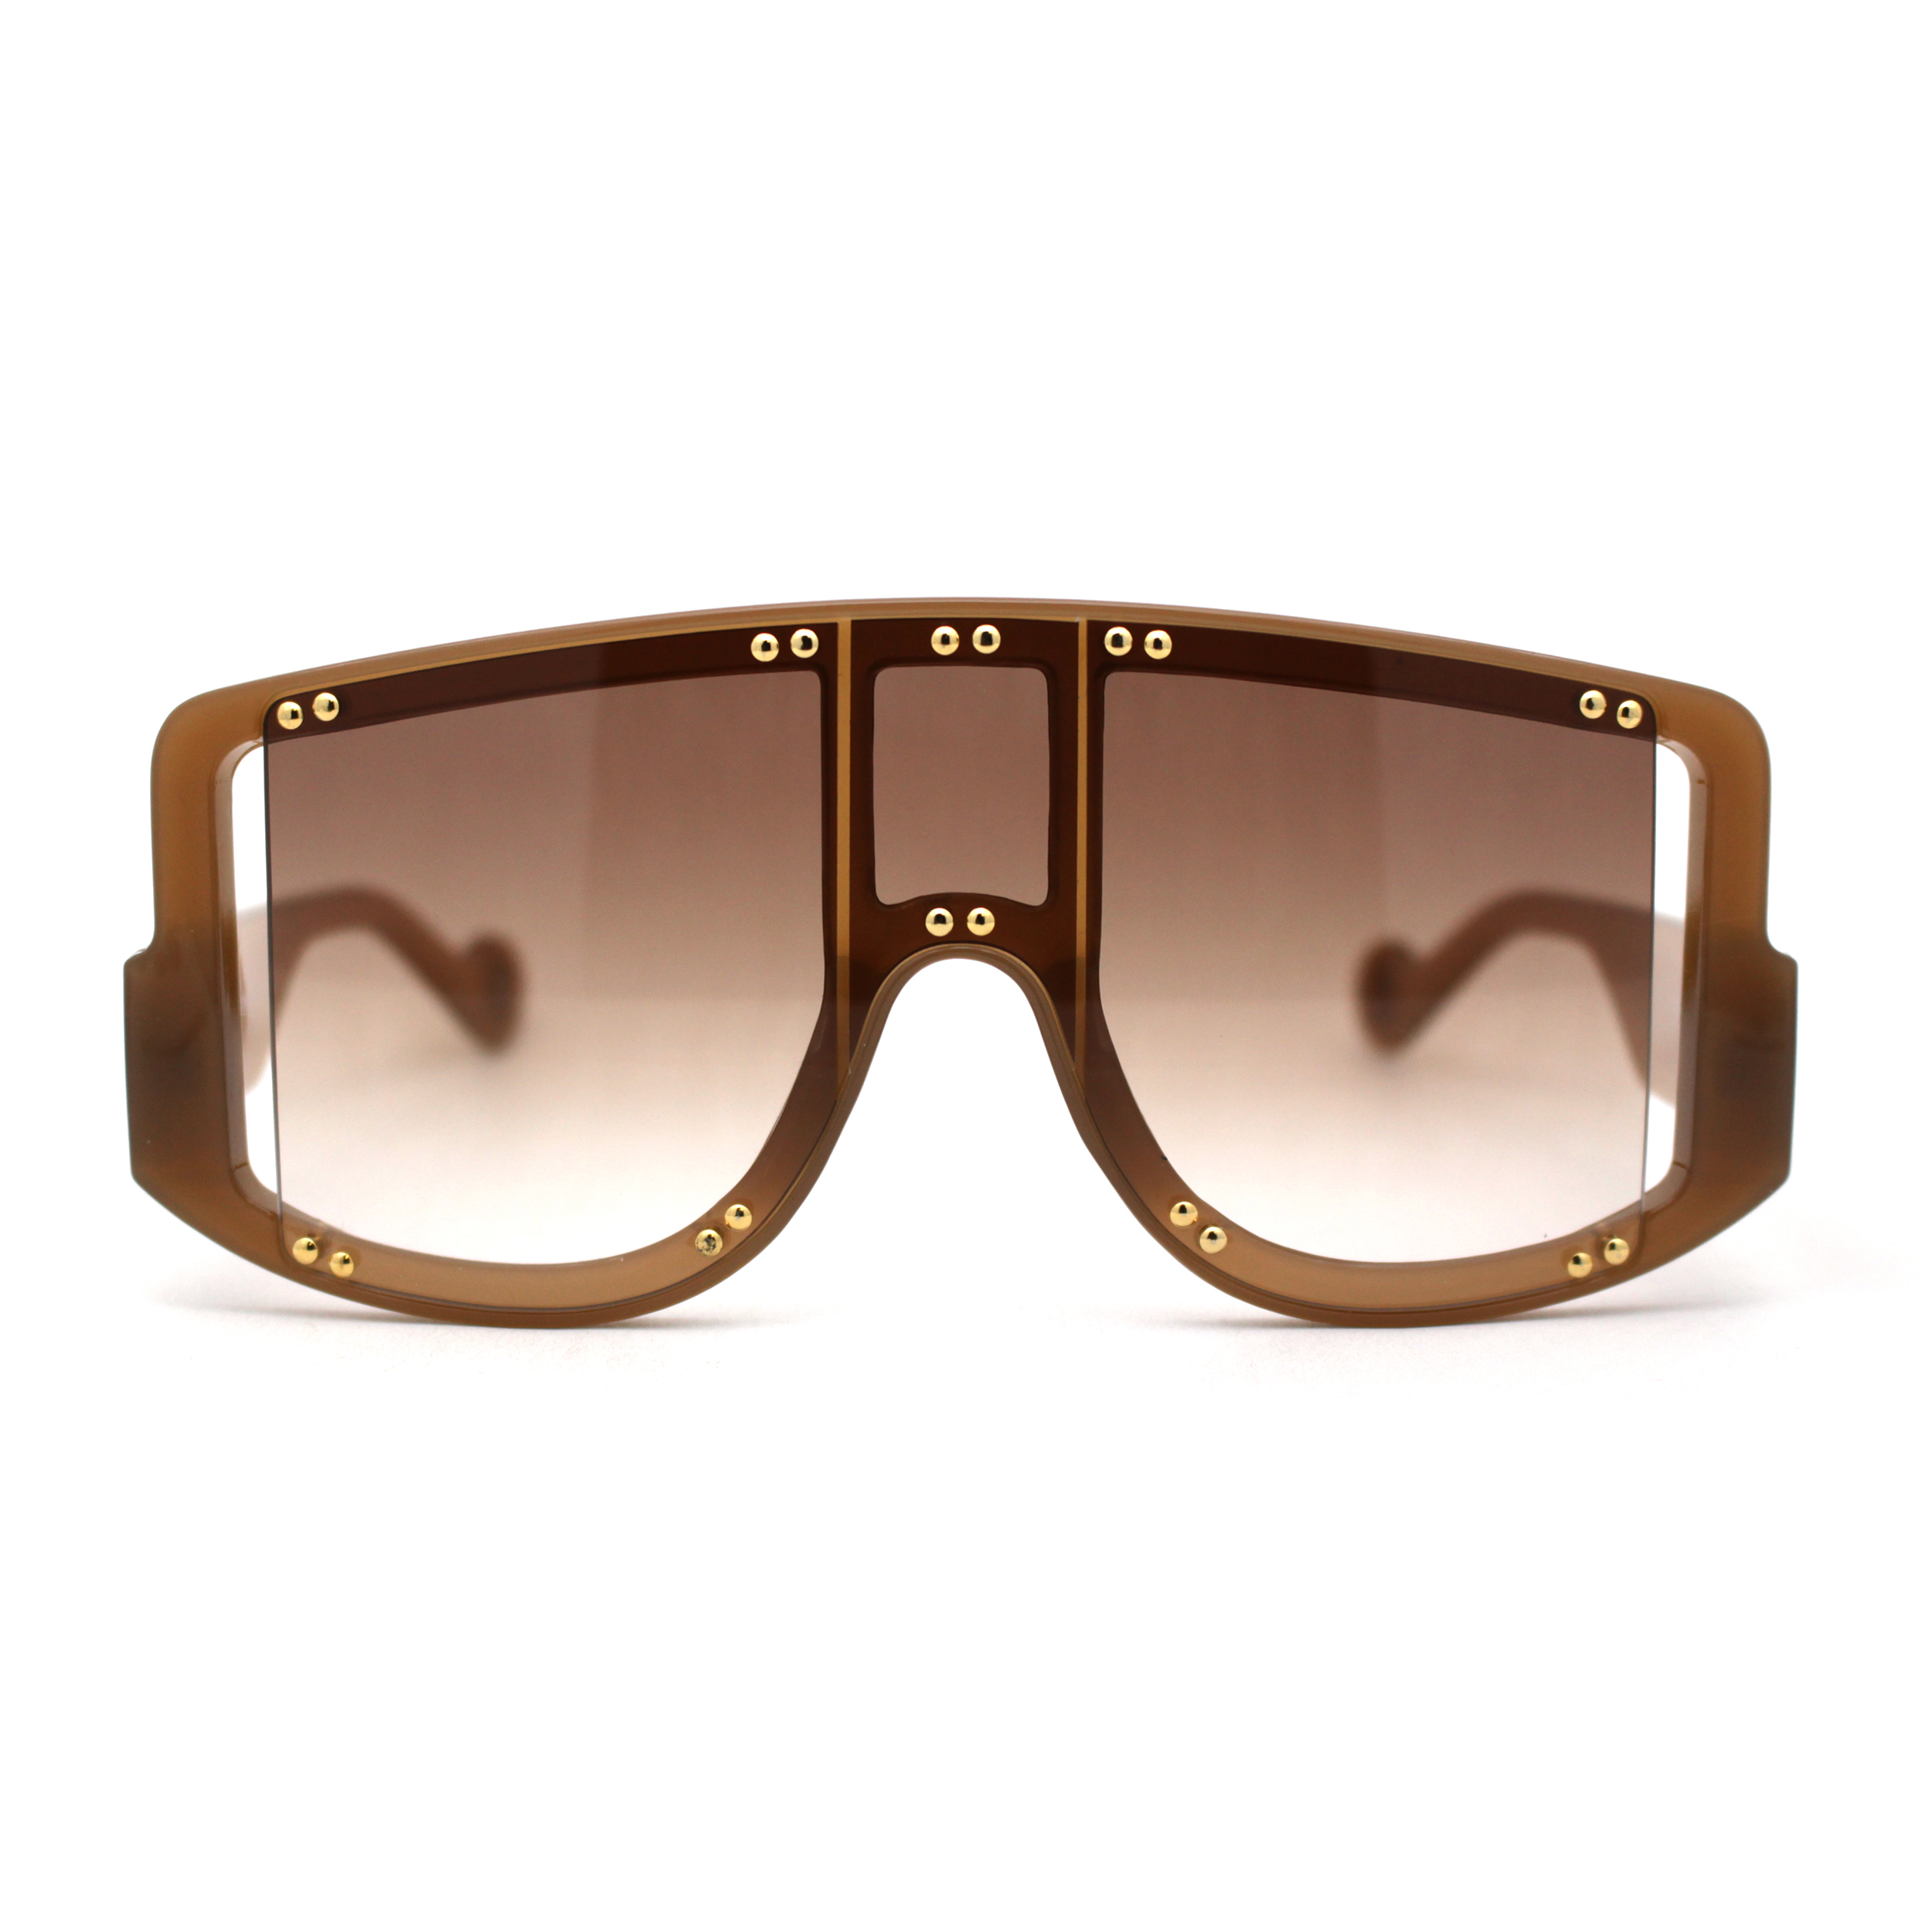 Multi Panel Shield Drop Temple Plastic Curved Top Racer Sunglasses All Brown - image 1 of 4